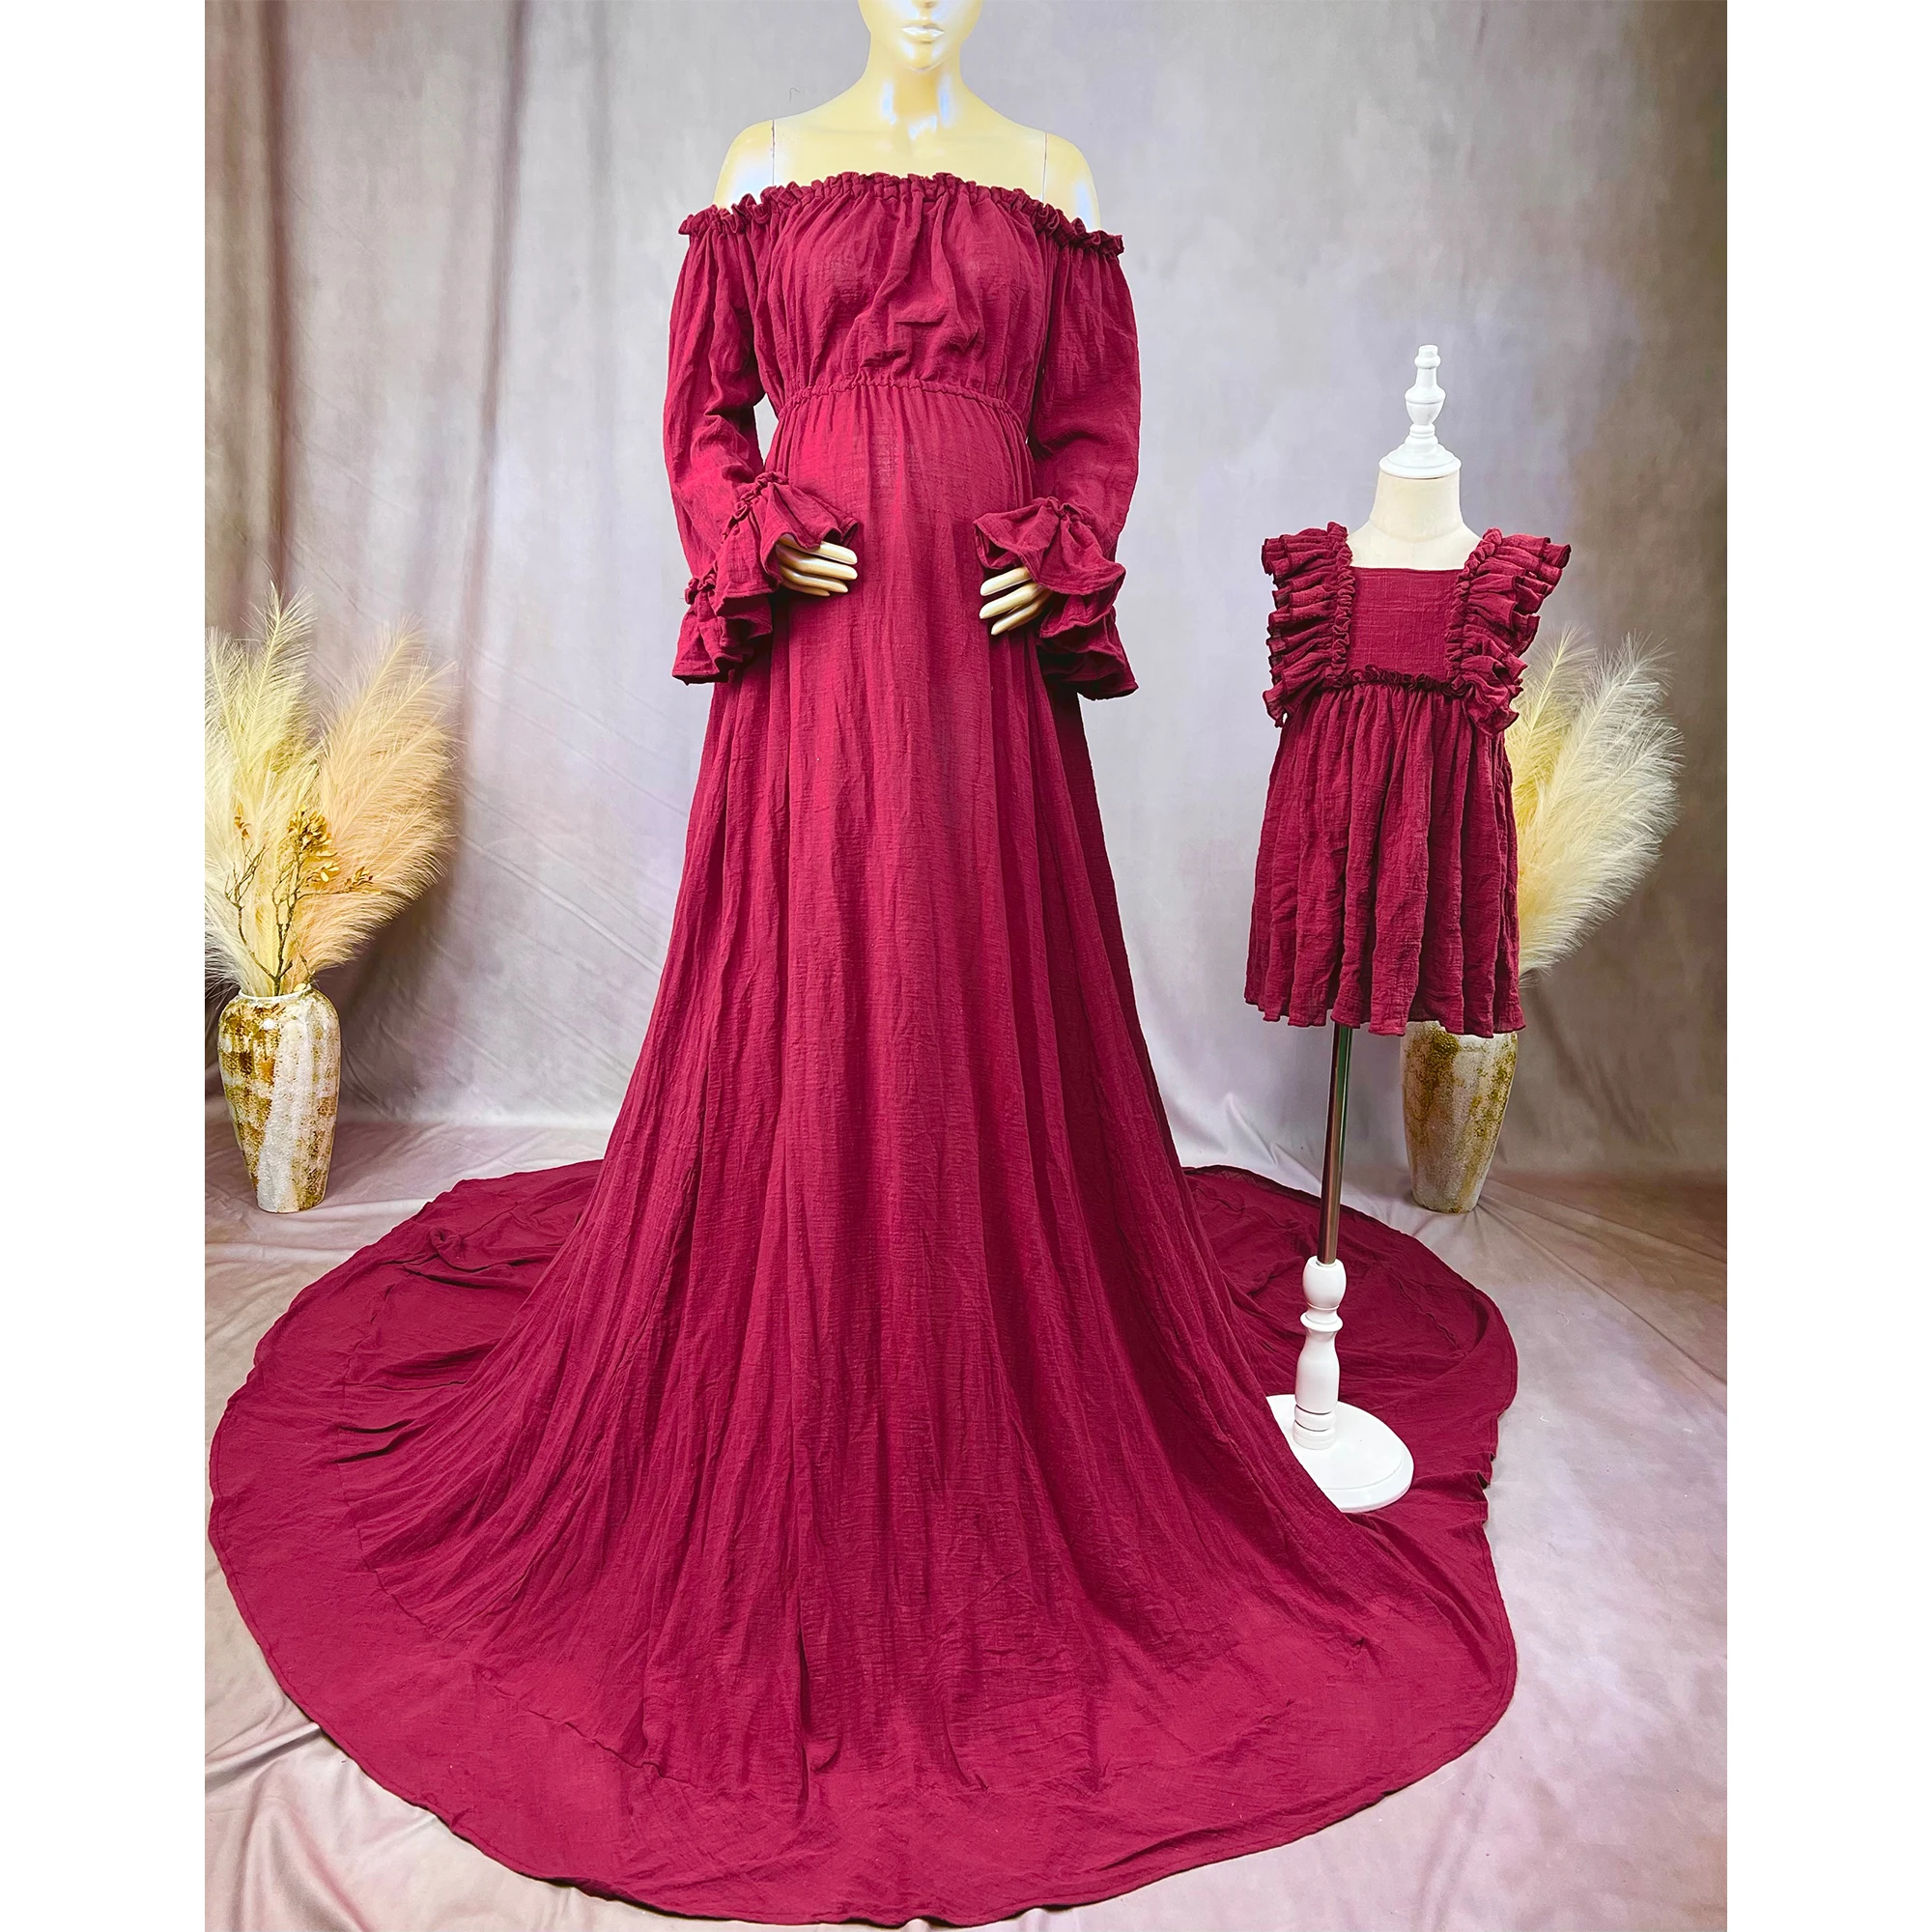 Don&Judy Boho Dress Set Mommy&Me Baby Girl Princess Maternity Dresses Mother and Daughter Photography Gowns Photo Shoot Clothing